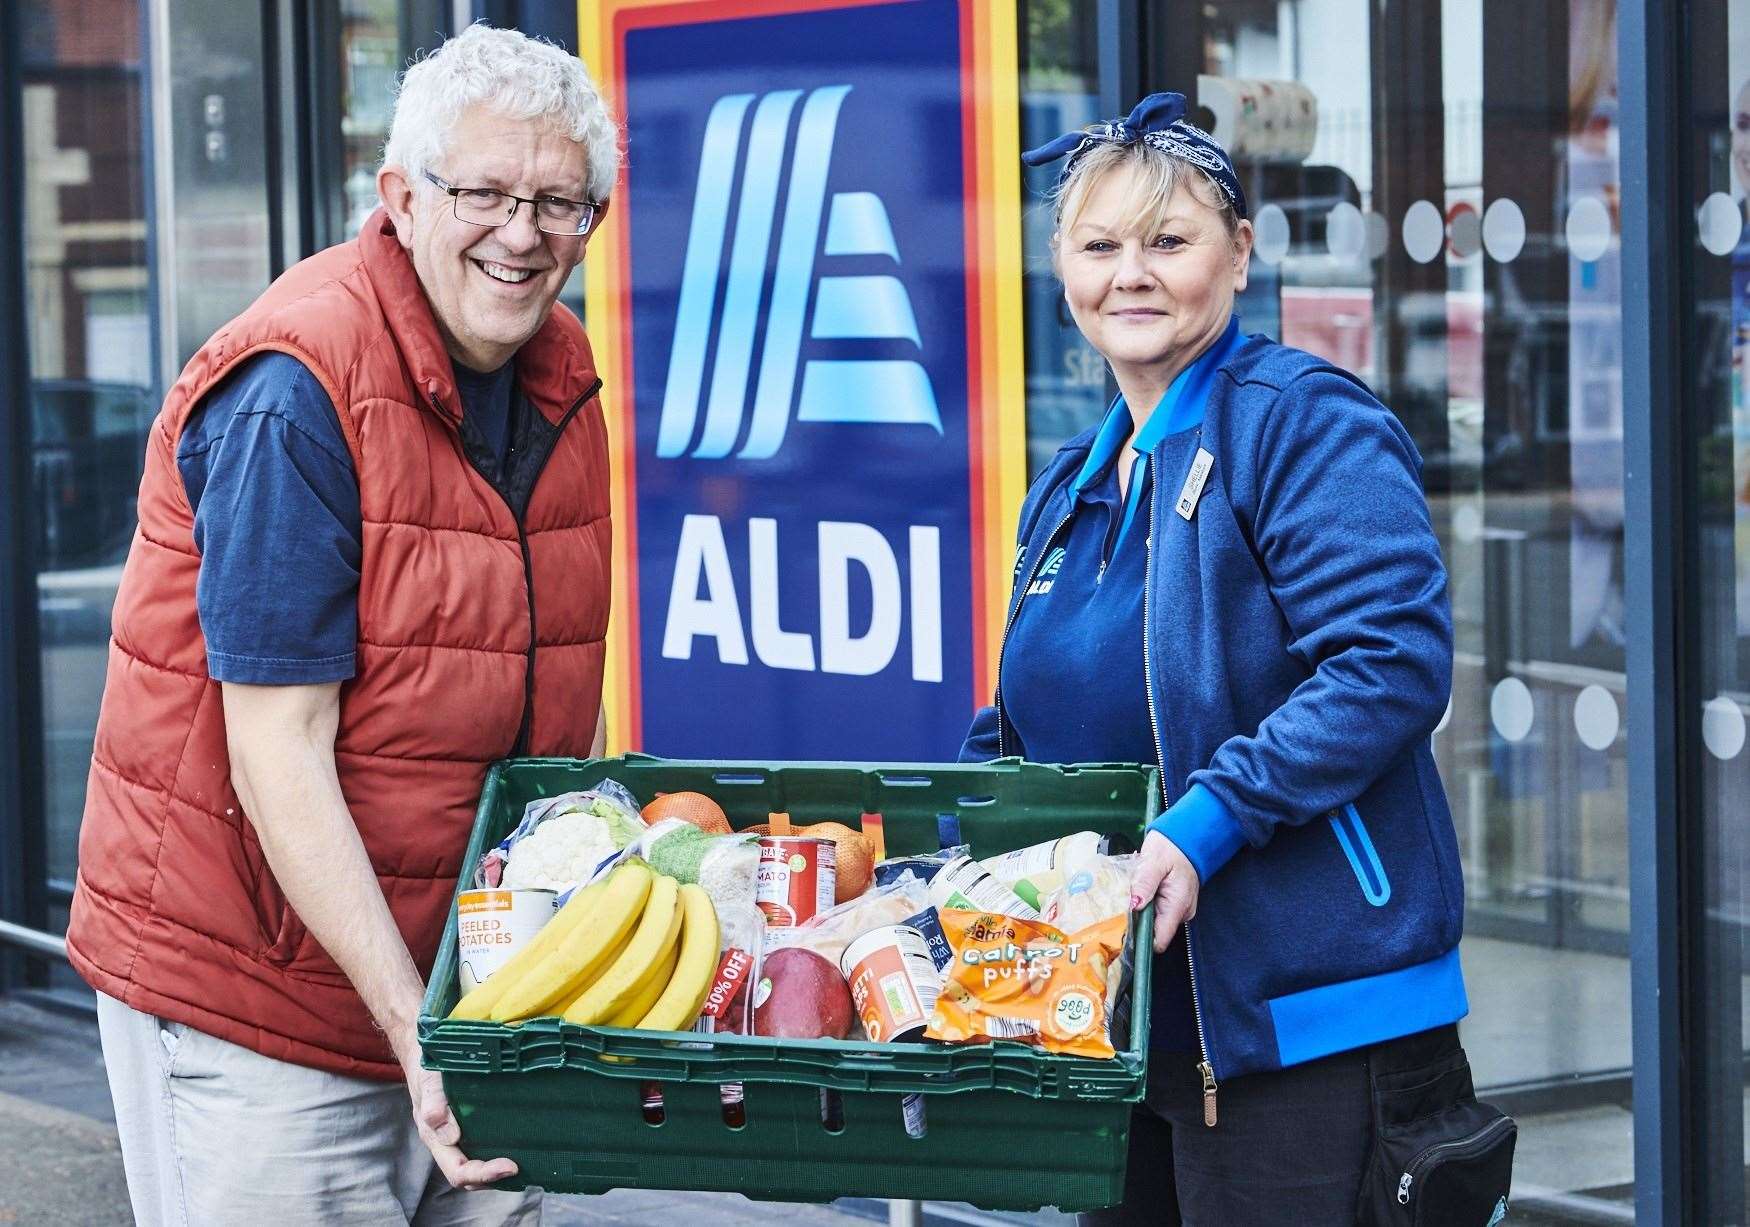 Aldi is dontaing food to local groups over the Festive period